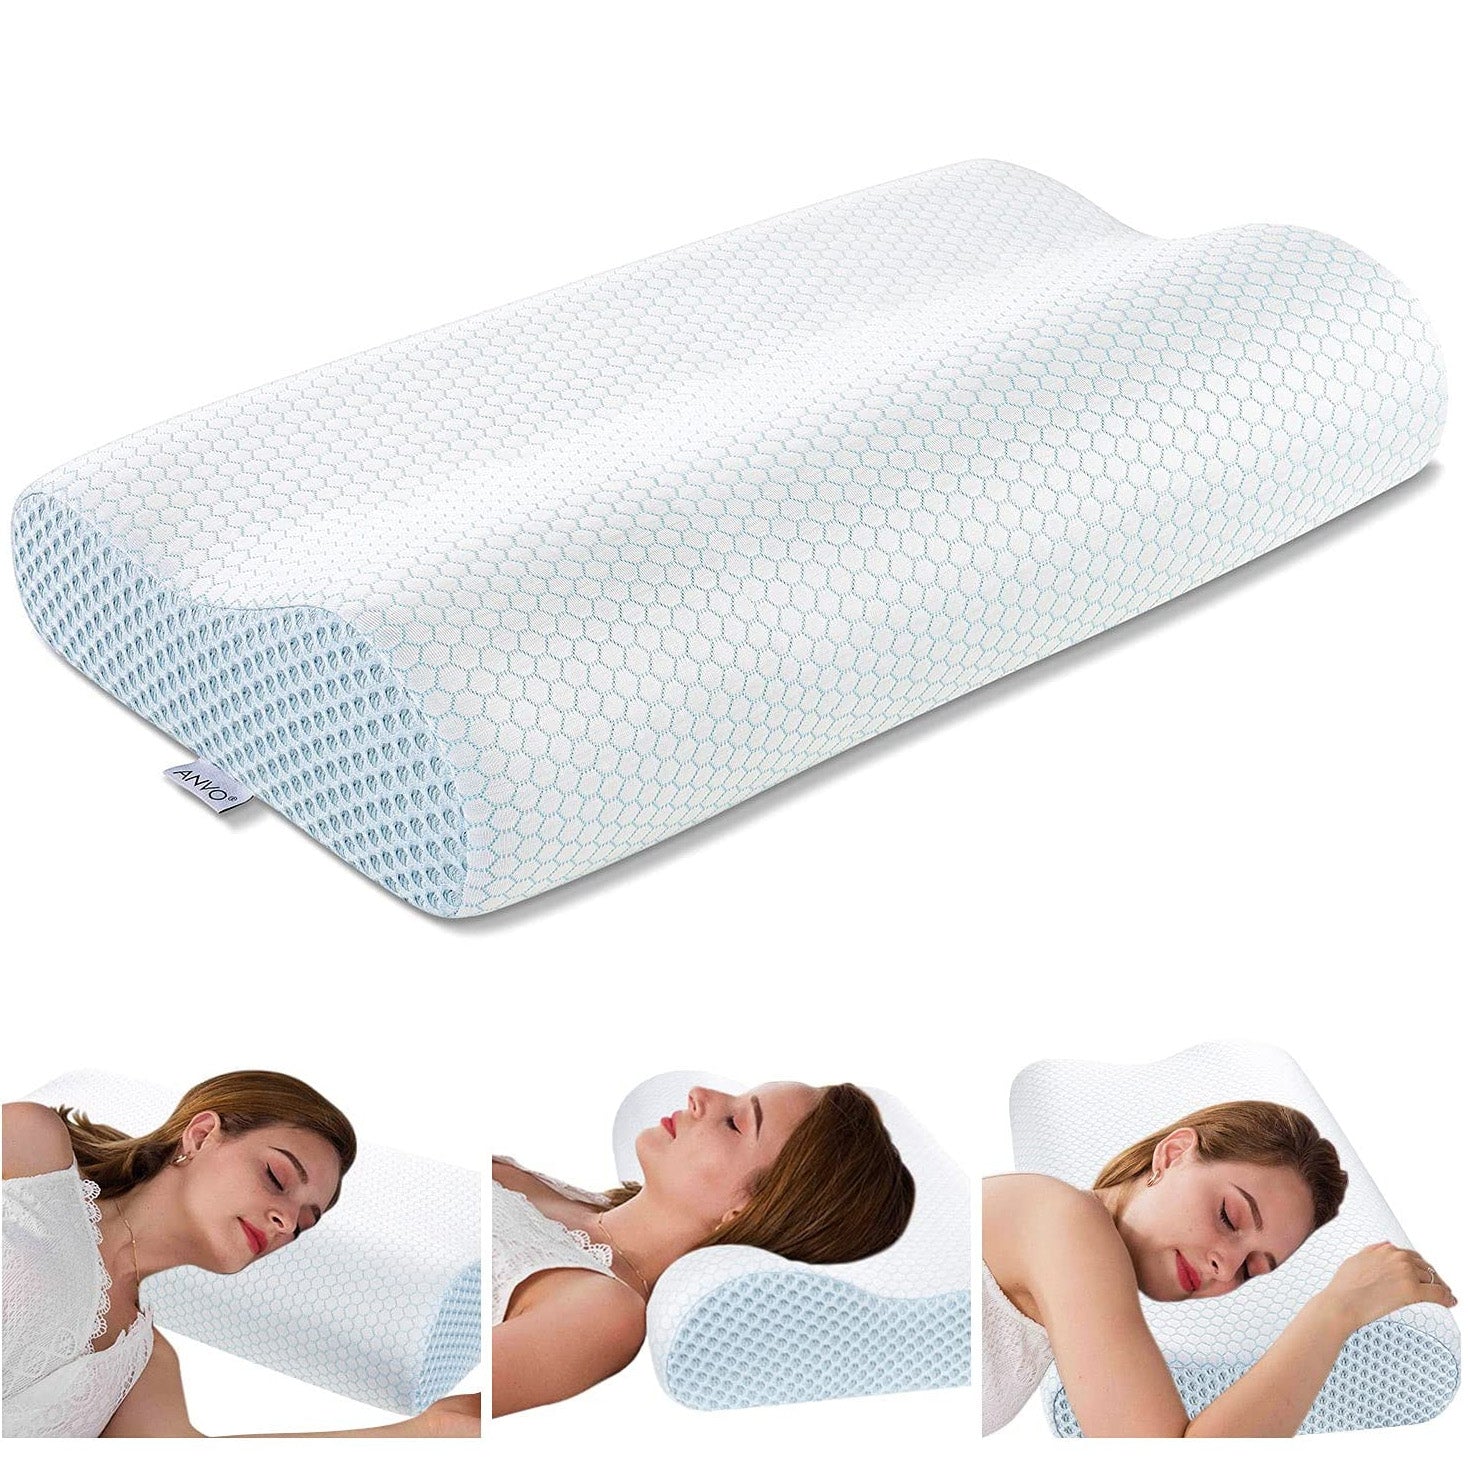 Anvo Memory Foam Pillows, Cervical Pillow for Neck Pain, Neck Pillow for  Pain Relief Sleeping, Side Sleeper Pillow – Anvo Home